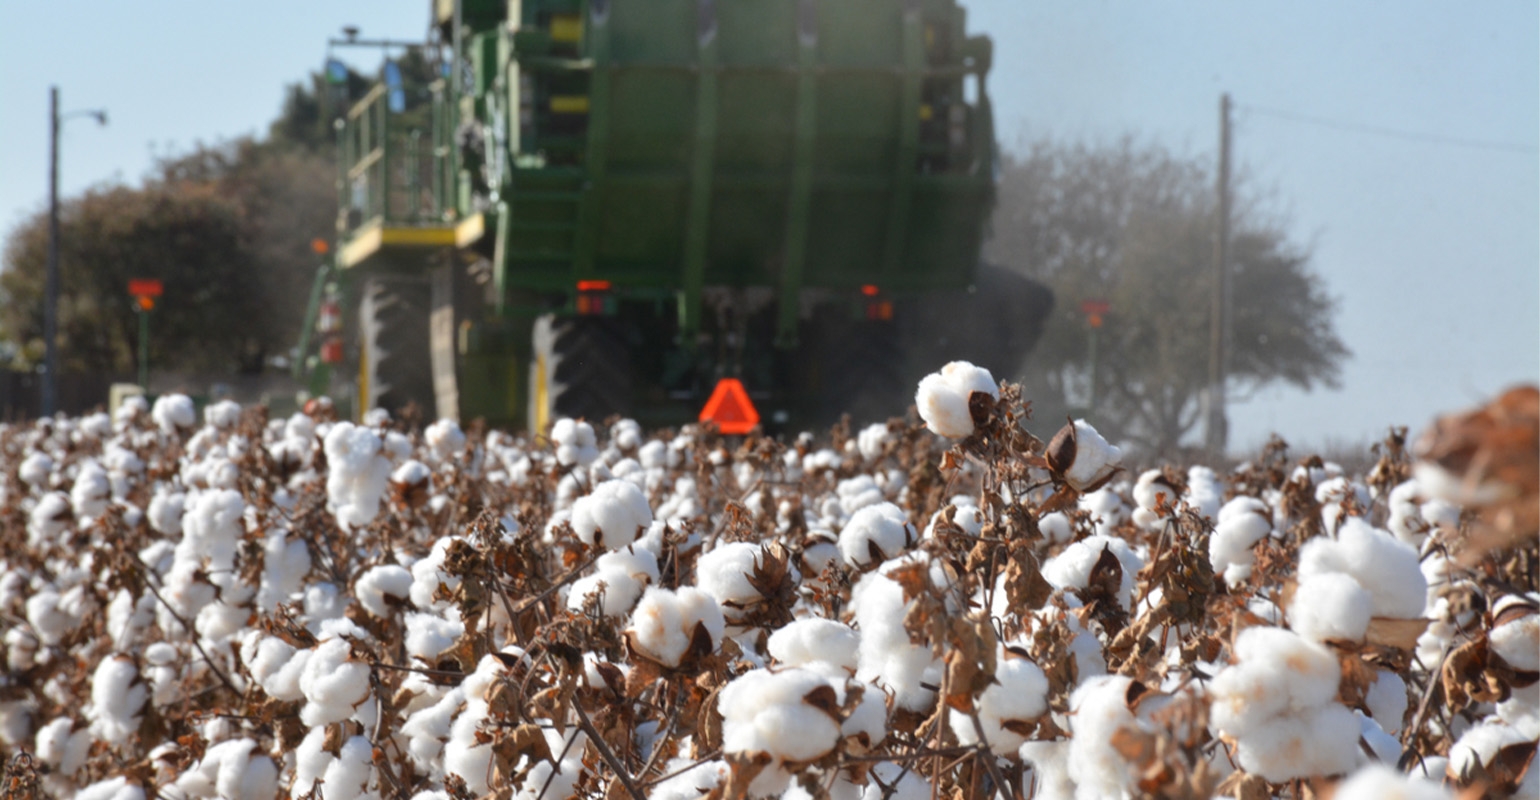 Brazil Inches Closer to Unseating US as Top Cotton Exporter